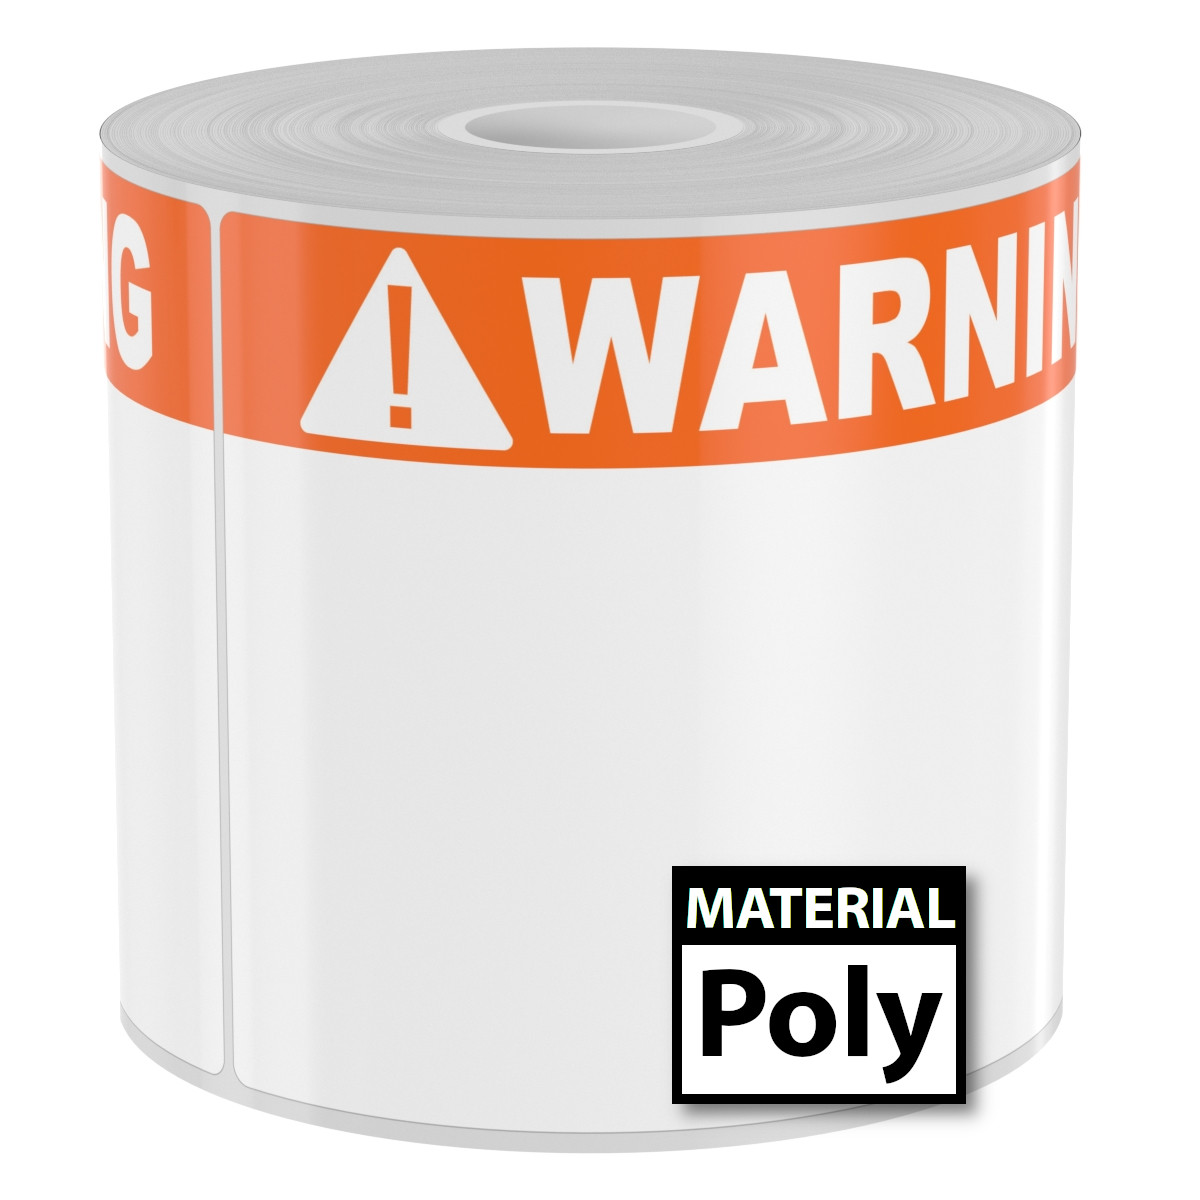 Detail view for 250 4" x 6" High-Performance Poly Arc Flash Labels White Warning on Orange Header